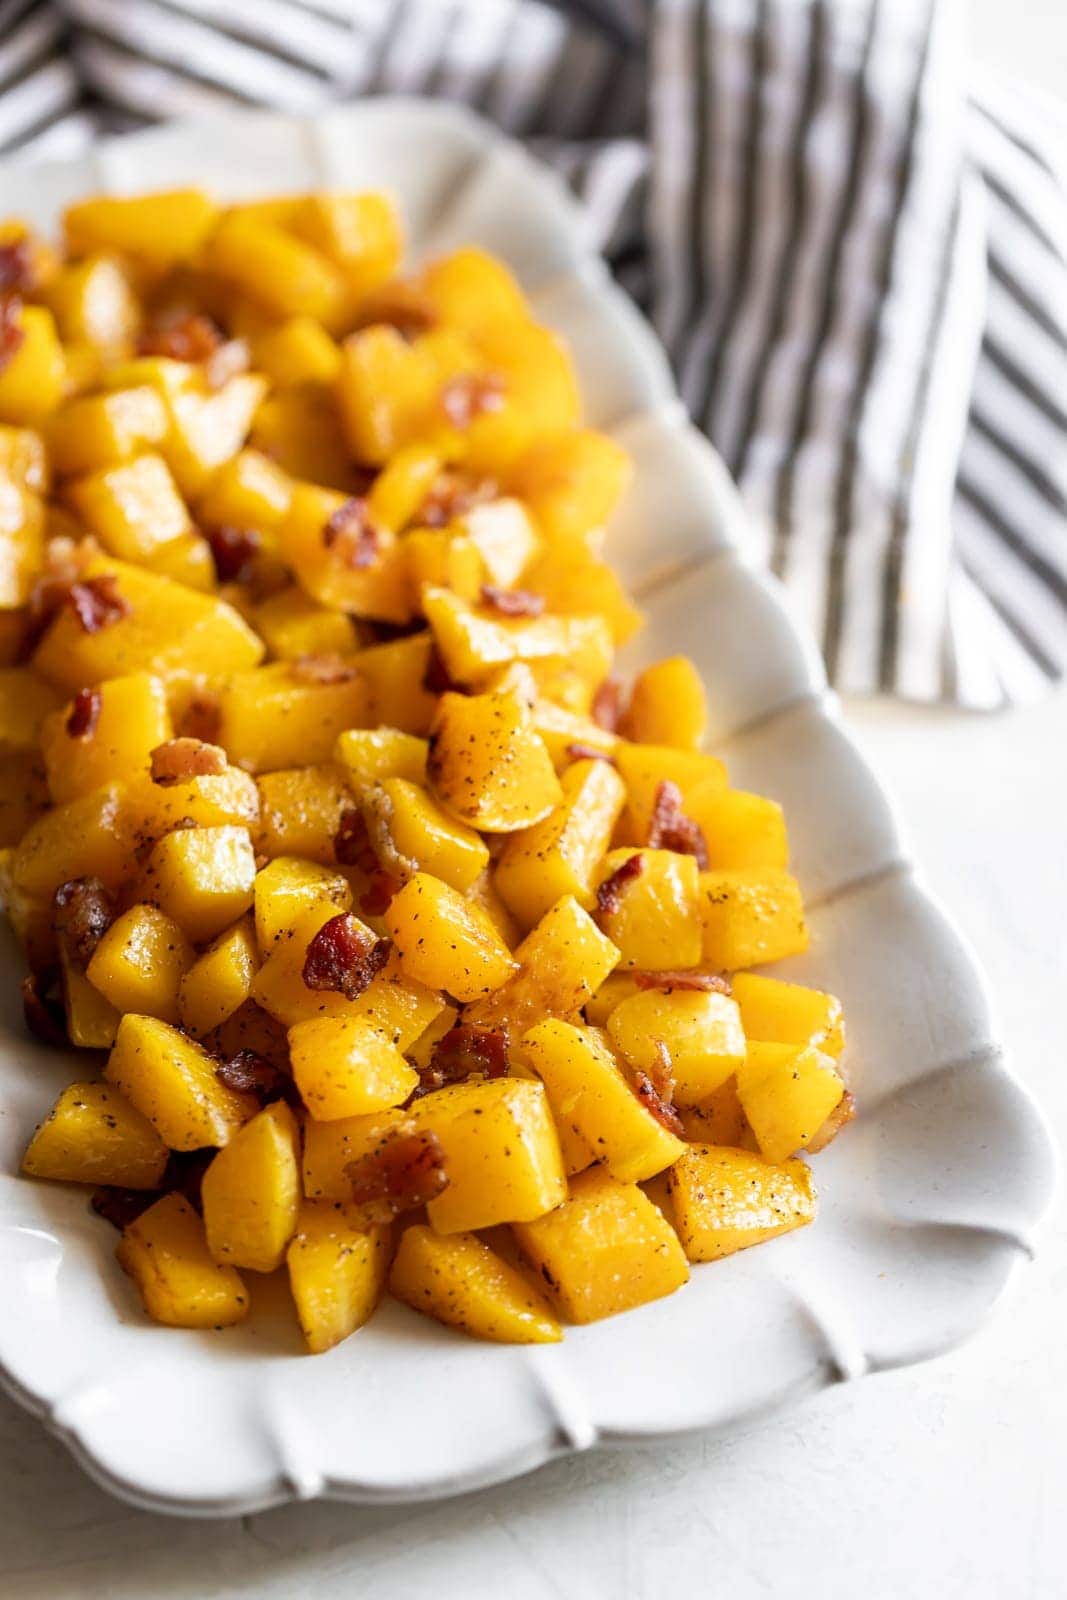 A simple savory roasted butternut squash with crisp pieces of bacon. A healthy, easy to make side dish made with just 3 ingredients!